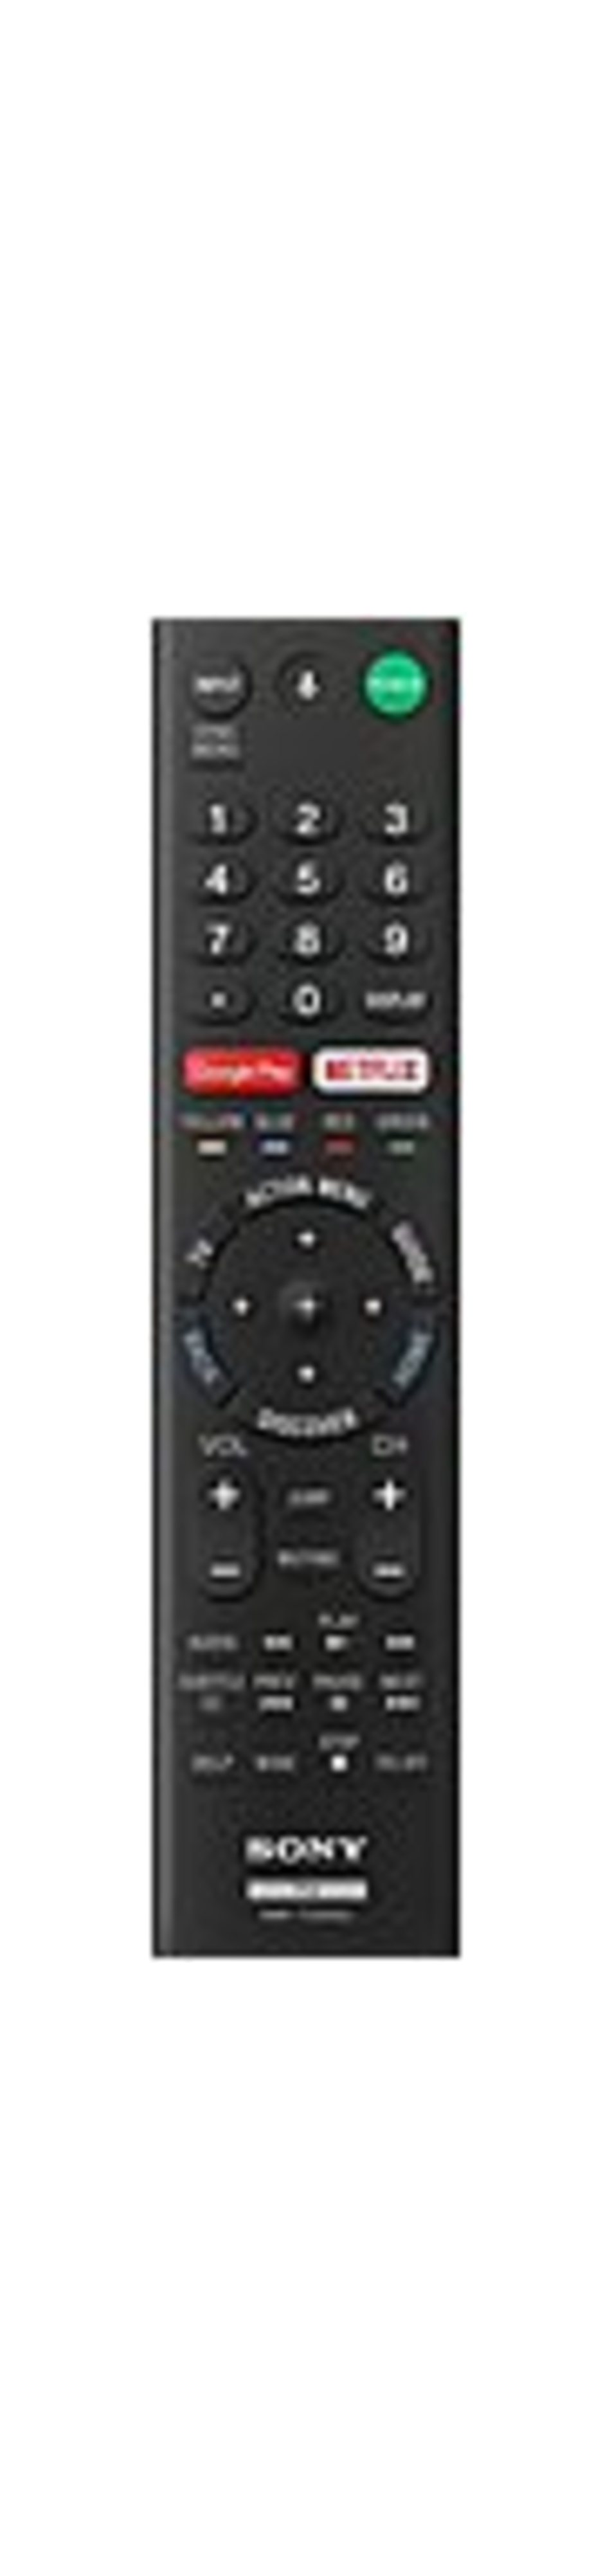 Sony RMF-TX200U TV Voice Remote Control - Battery Required - Black